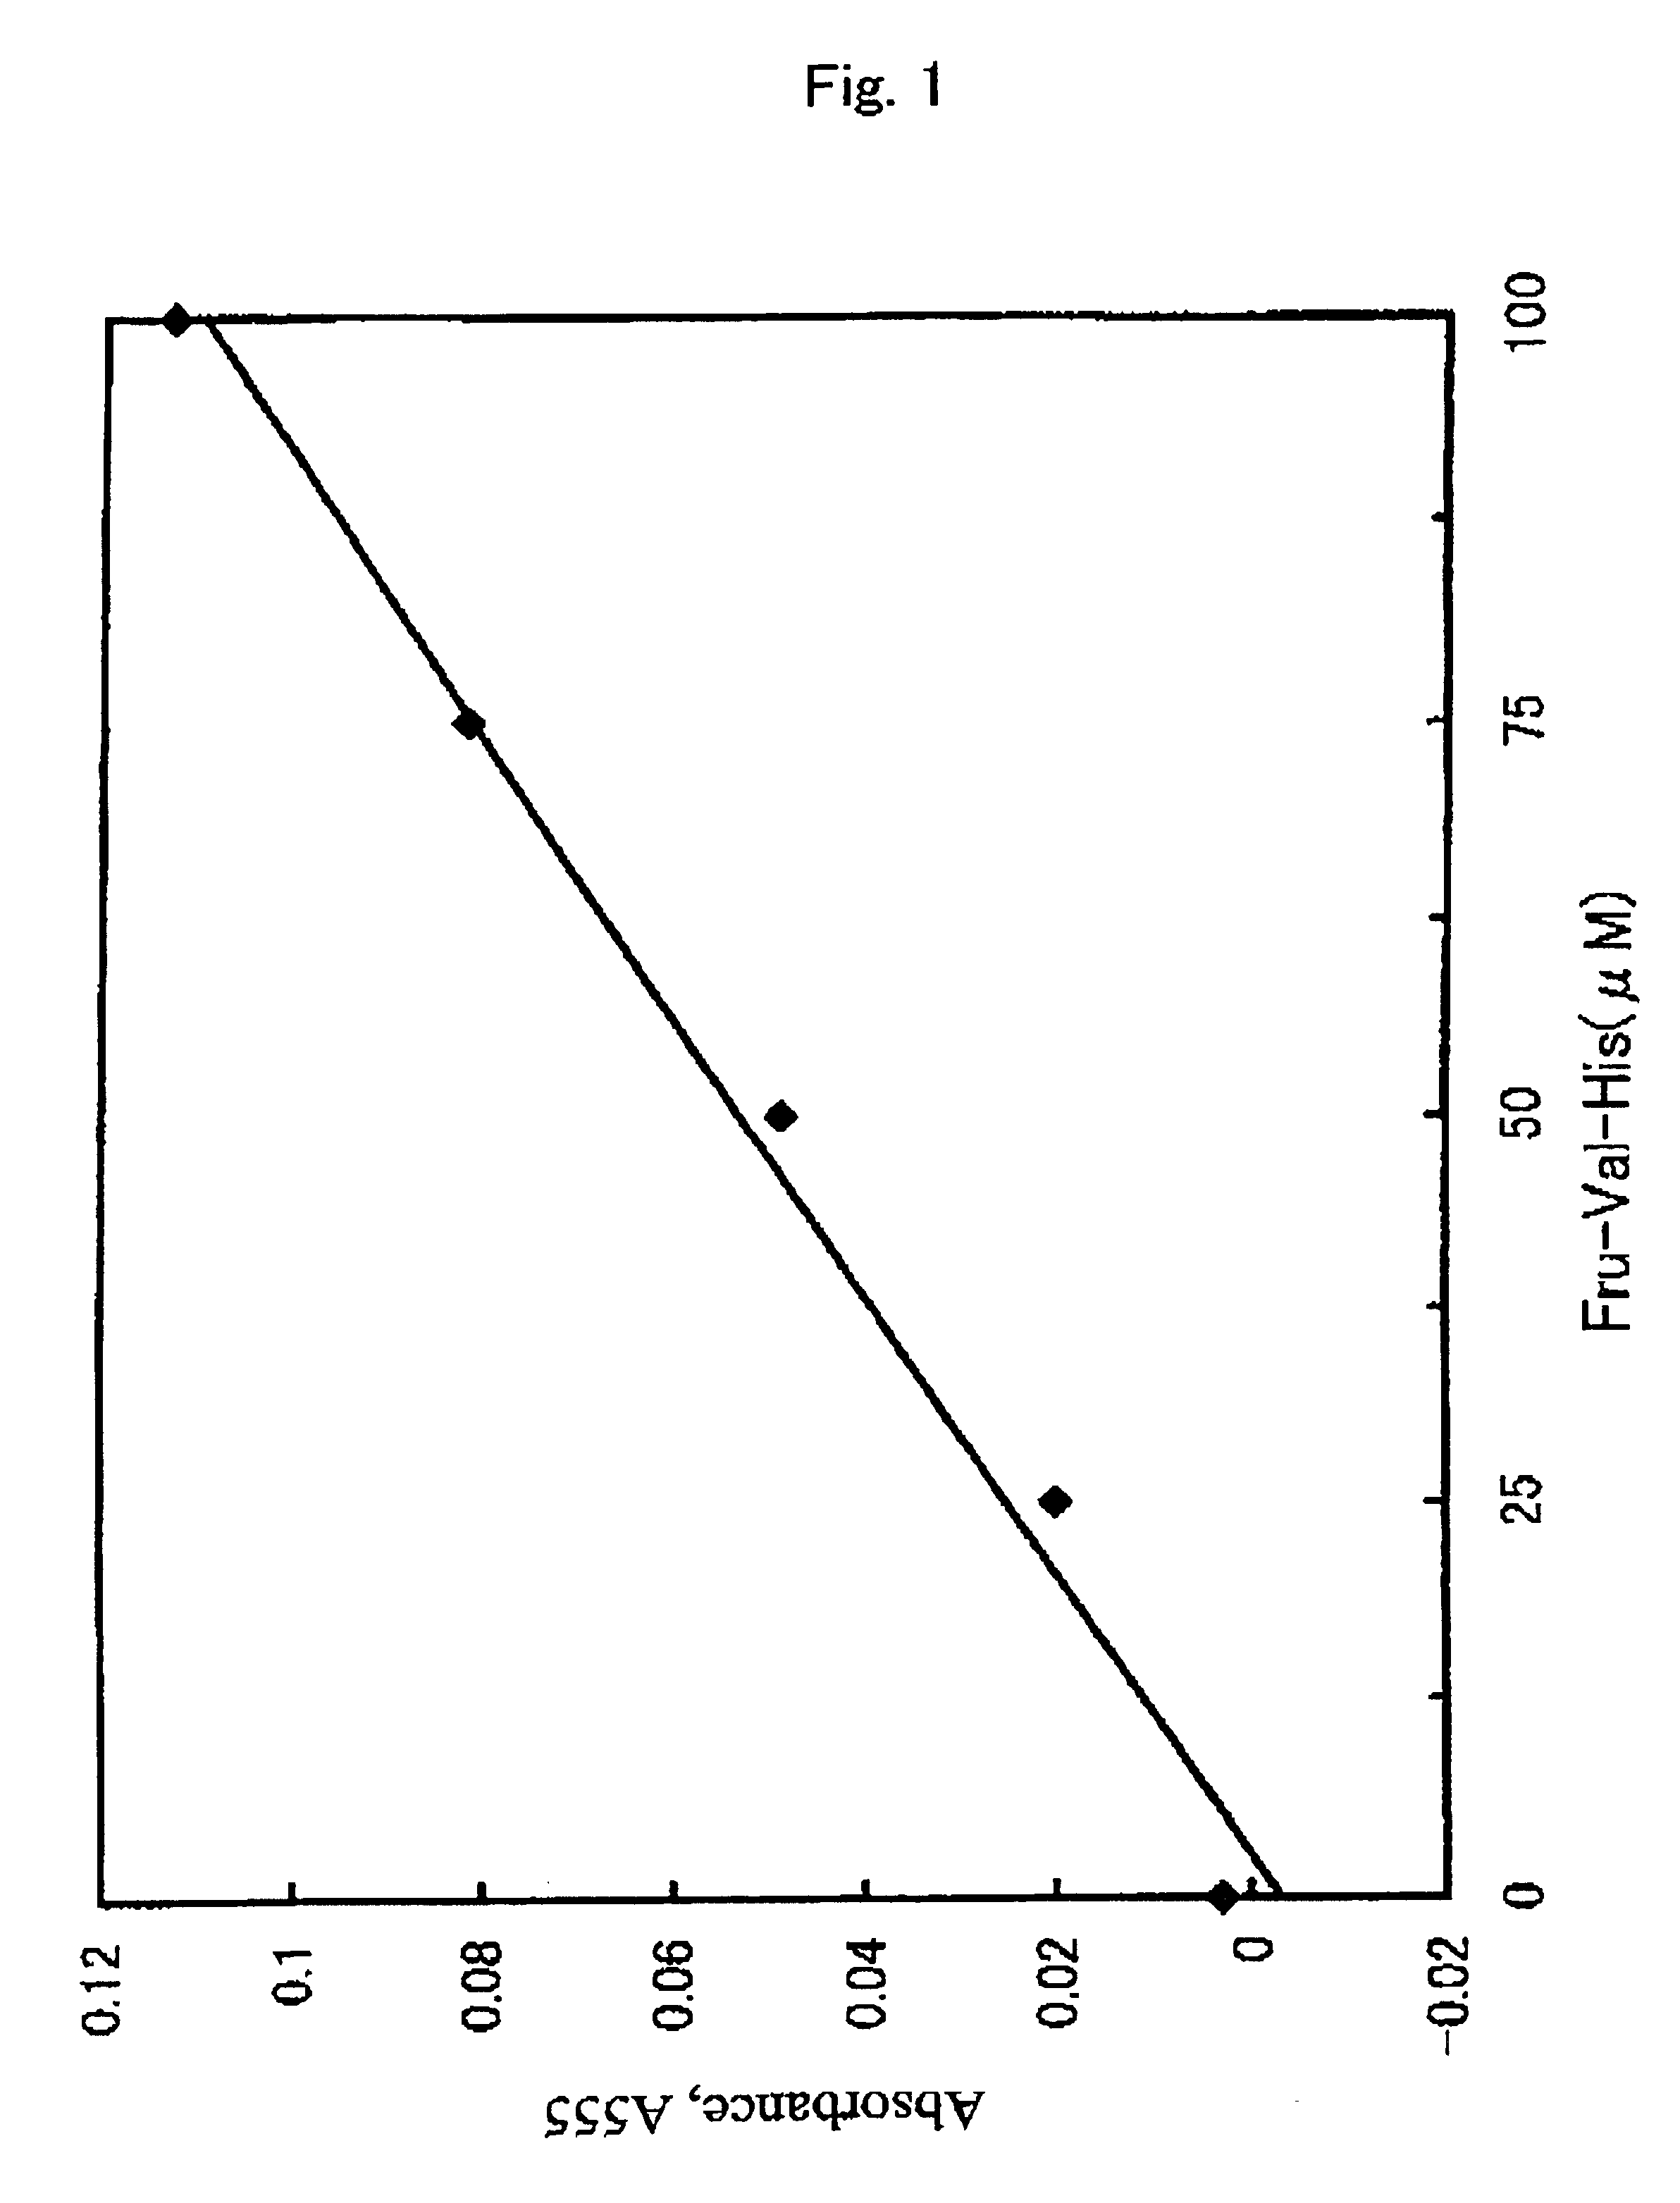 Method for assaying glycated protein